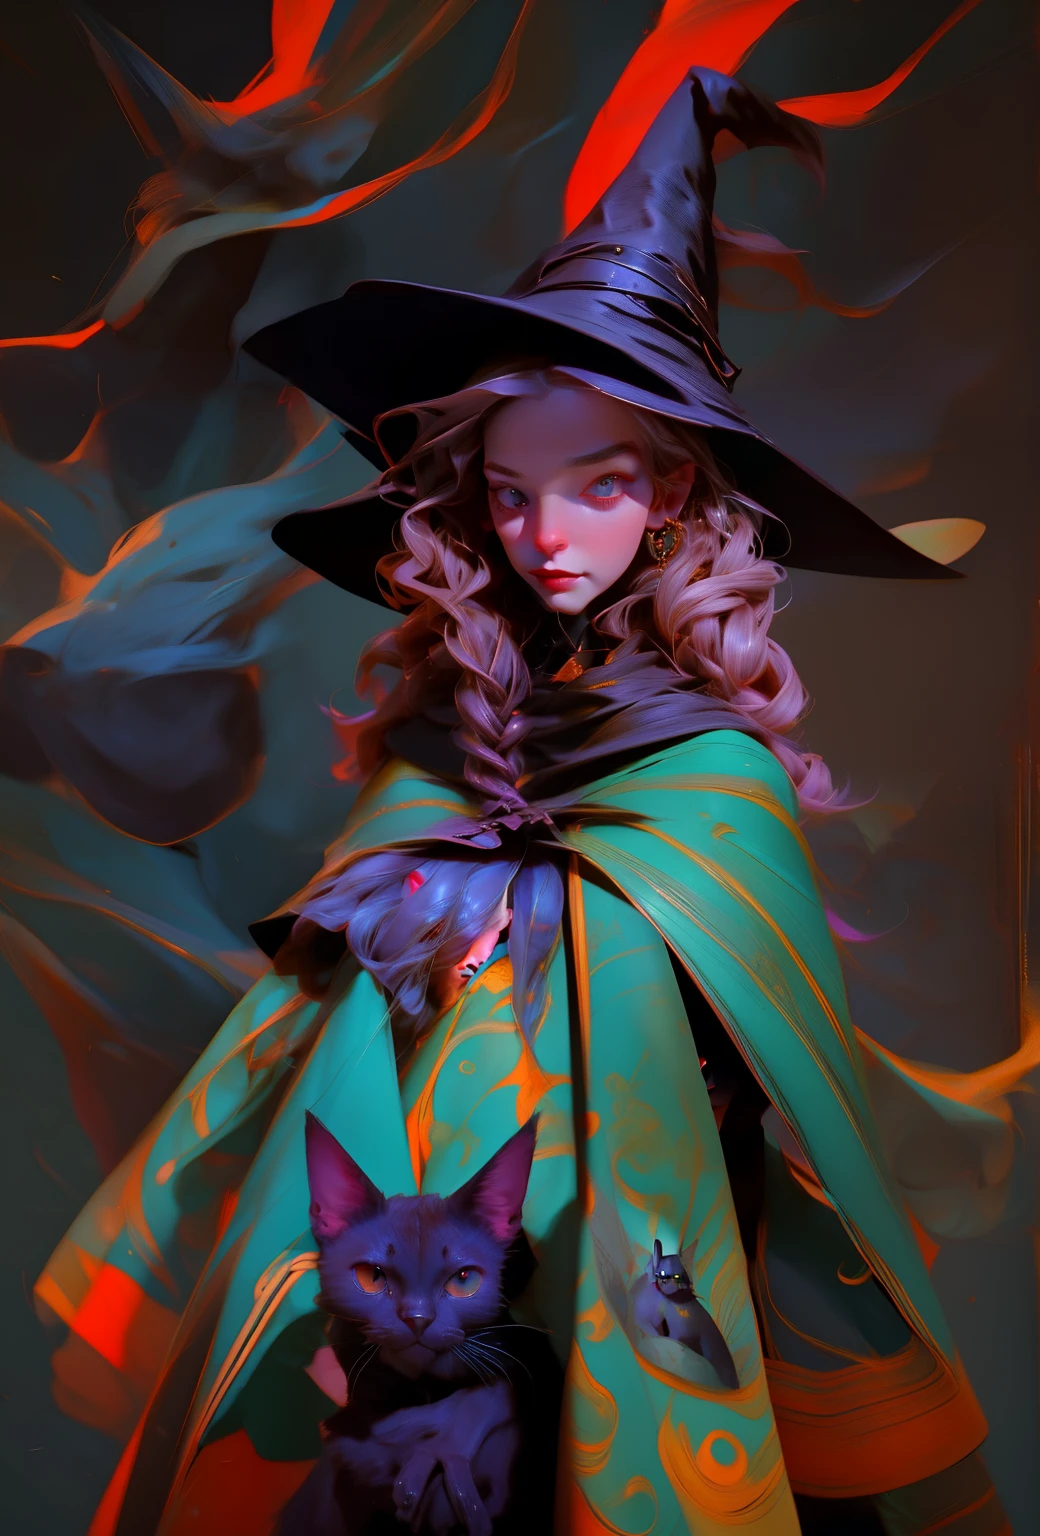 painting of a woman in a Hexe costume with a black cat, oil painting of cat Hexe, von Cynthia Sheppard, classical Hexe, cat Hexe, beautiful female Hexe, beautiful Hexe female, König ausrauben, Hexey, portrait of a young Hexe, portrait of a Hexe, Hexees, jen bartel, Hexe fairytale, beautiful Hexe spooky female, Hexe, Hexe woman